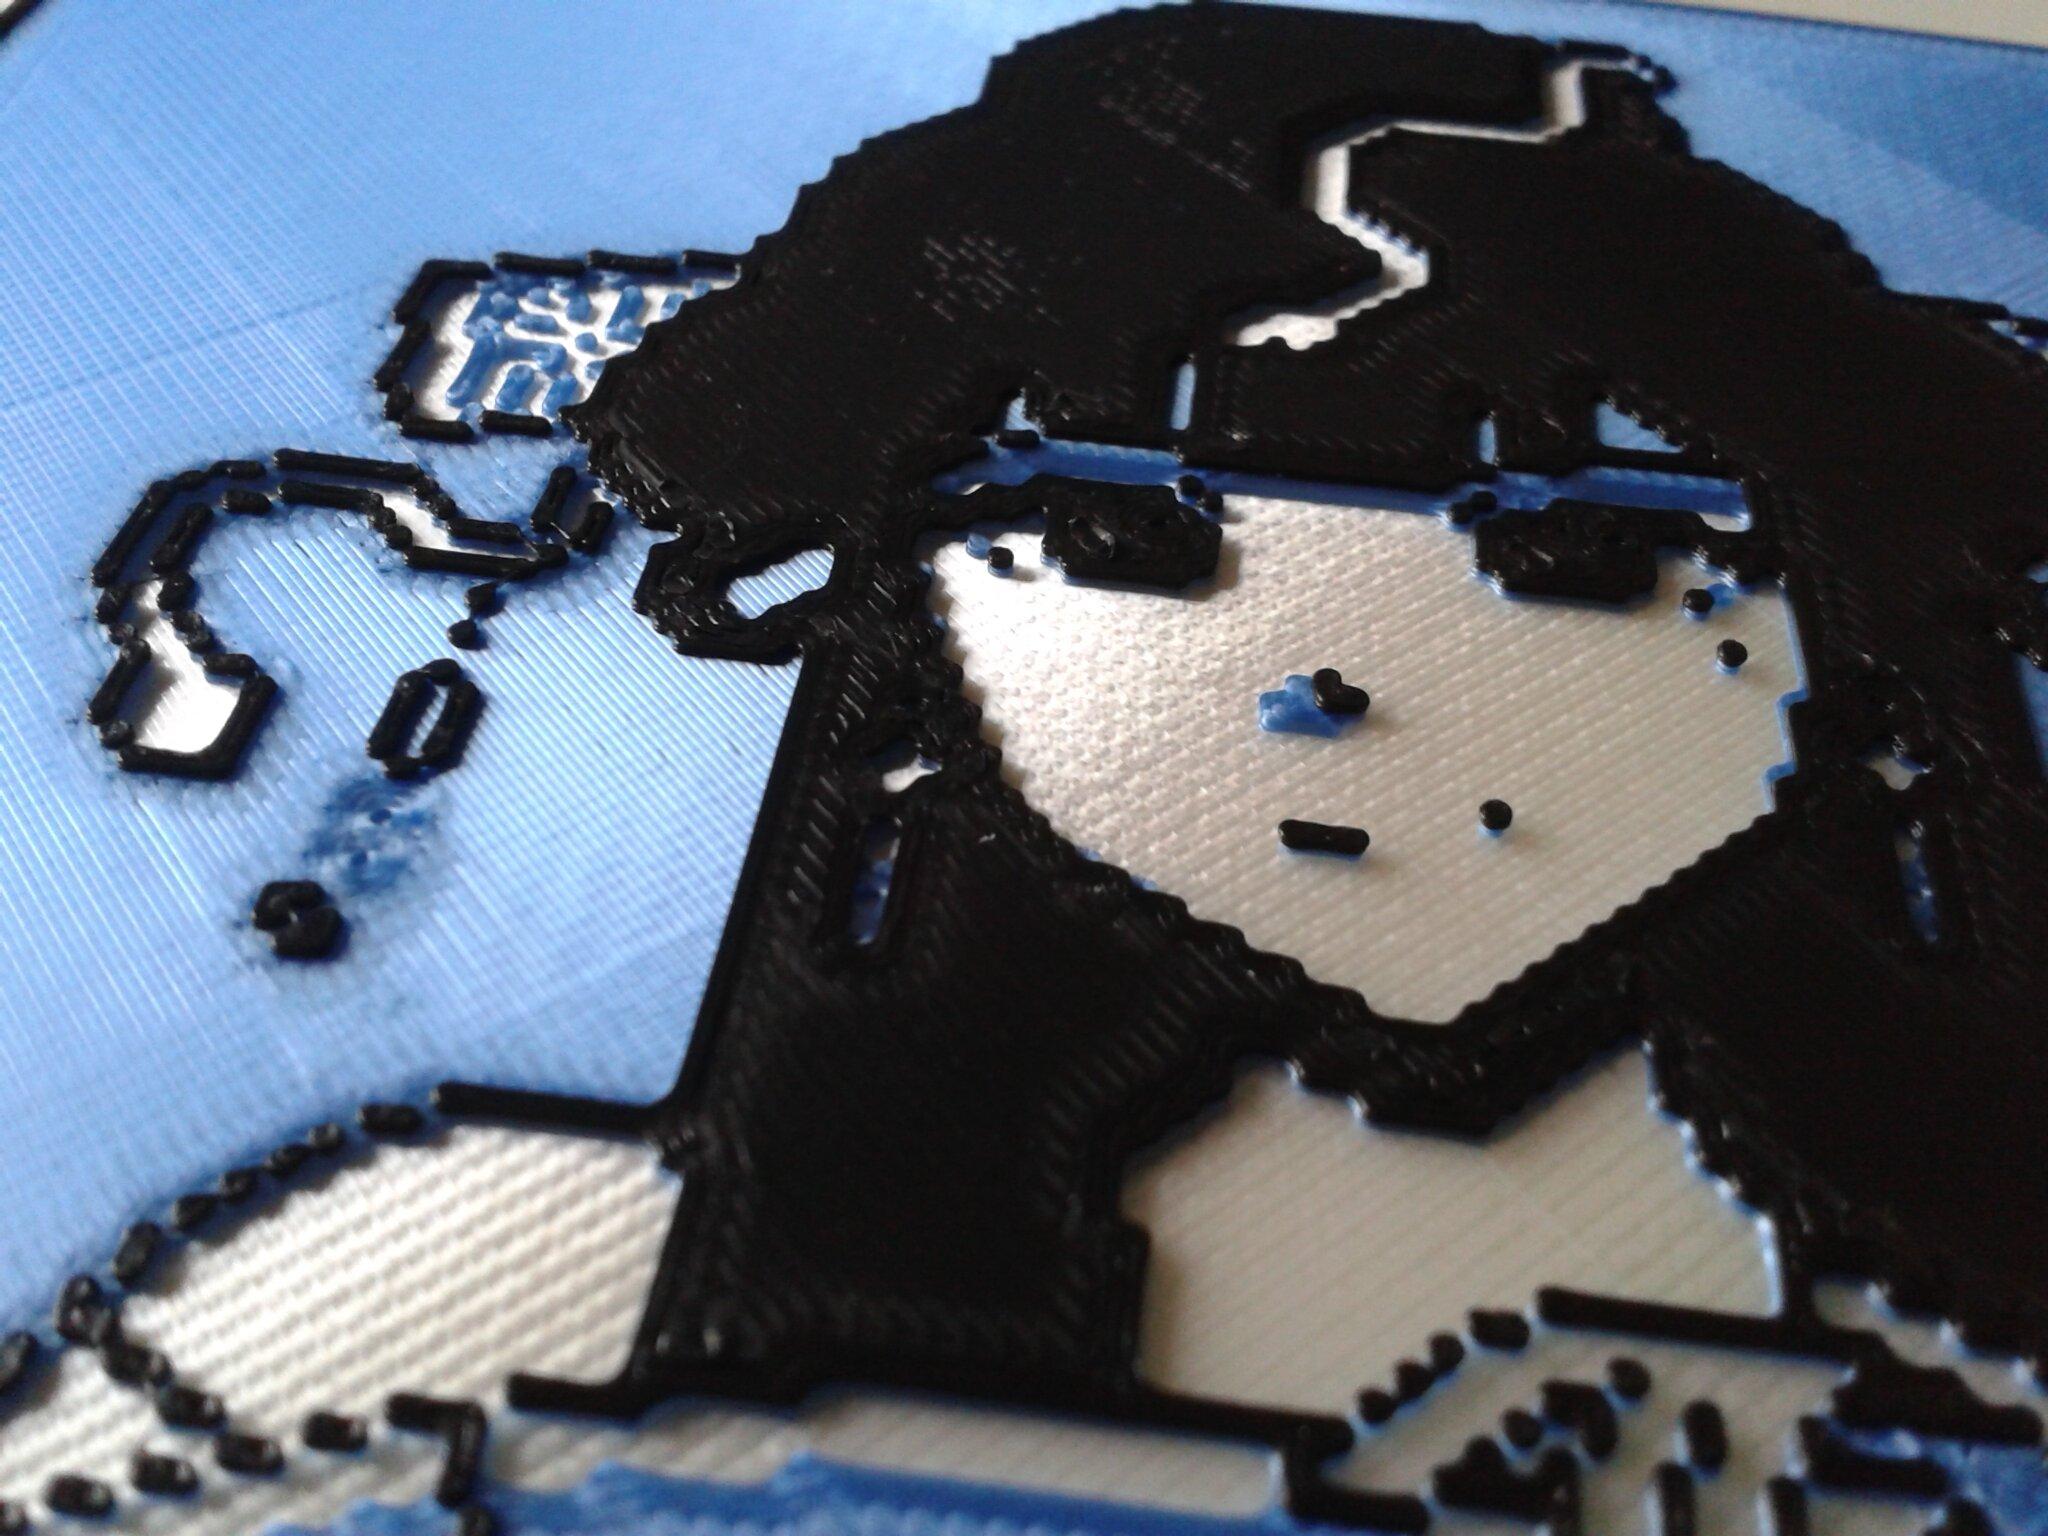 8 bit lady in a Hanku dress, by arts.of.win, with 2 filament changes. 3d model